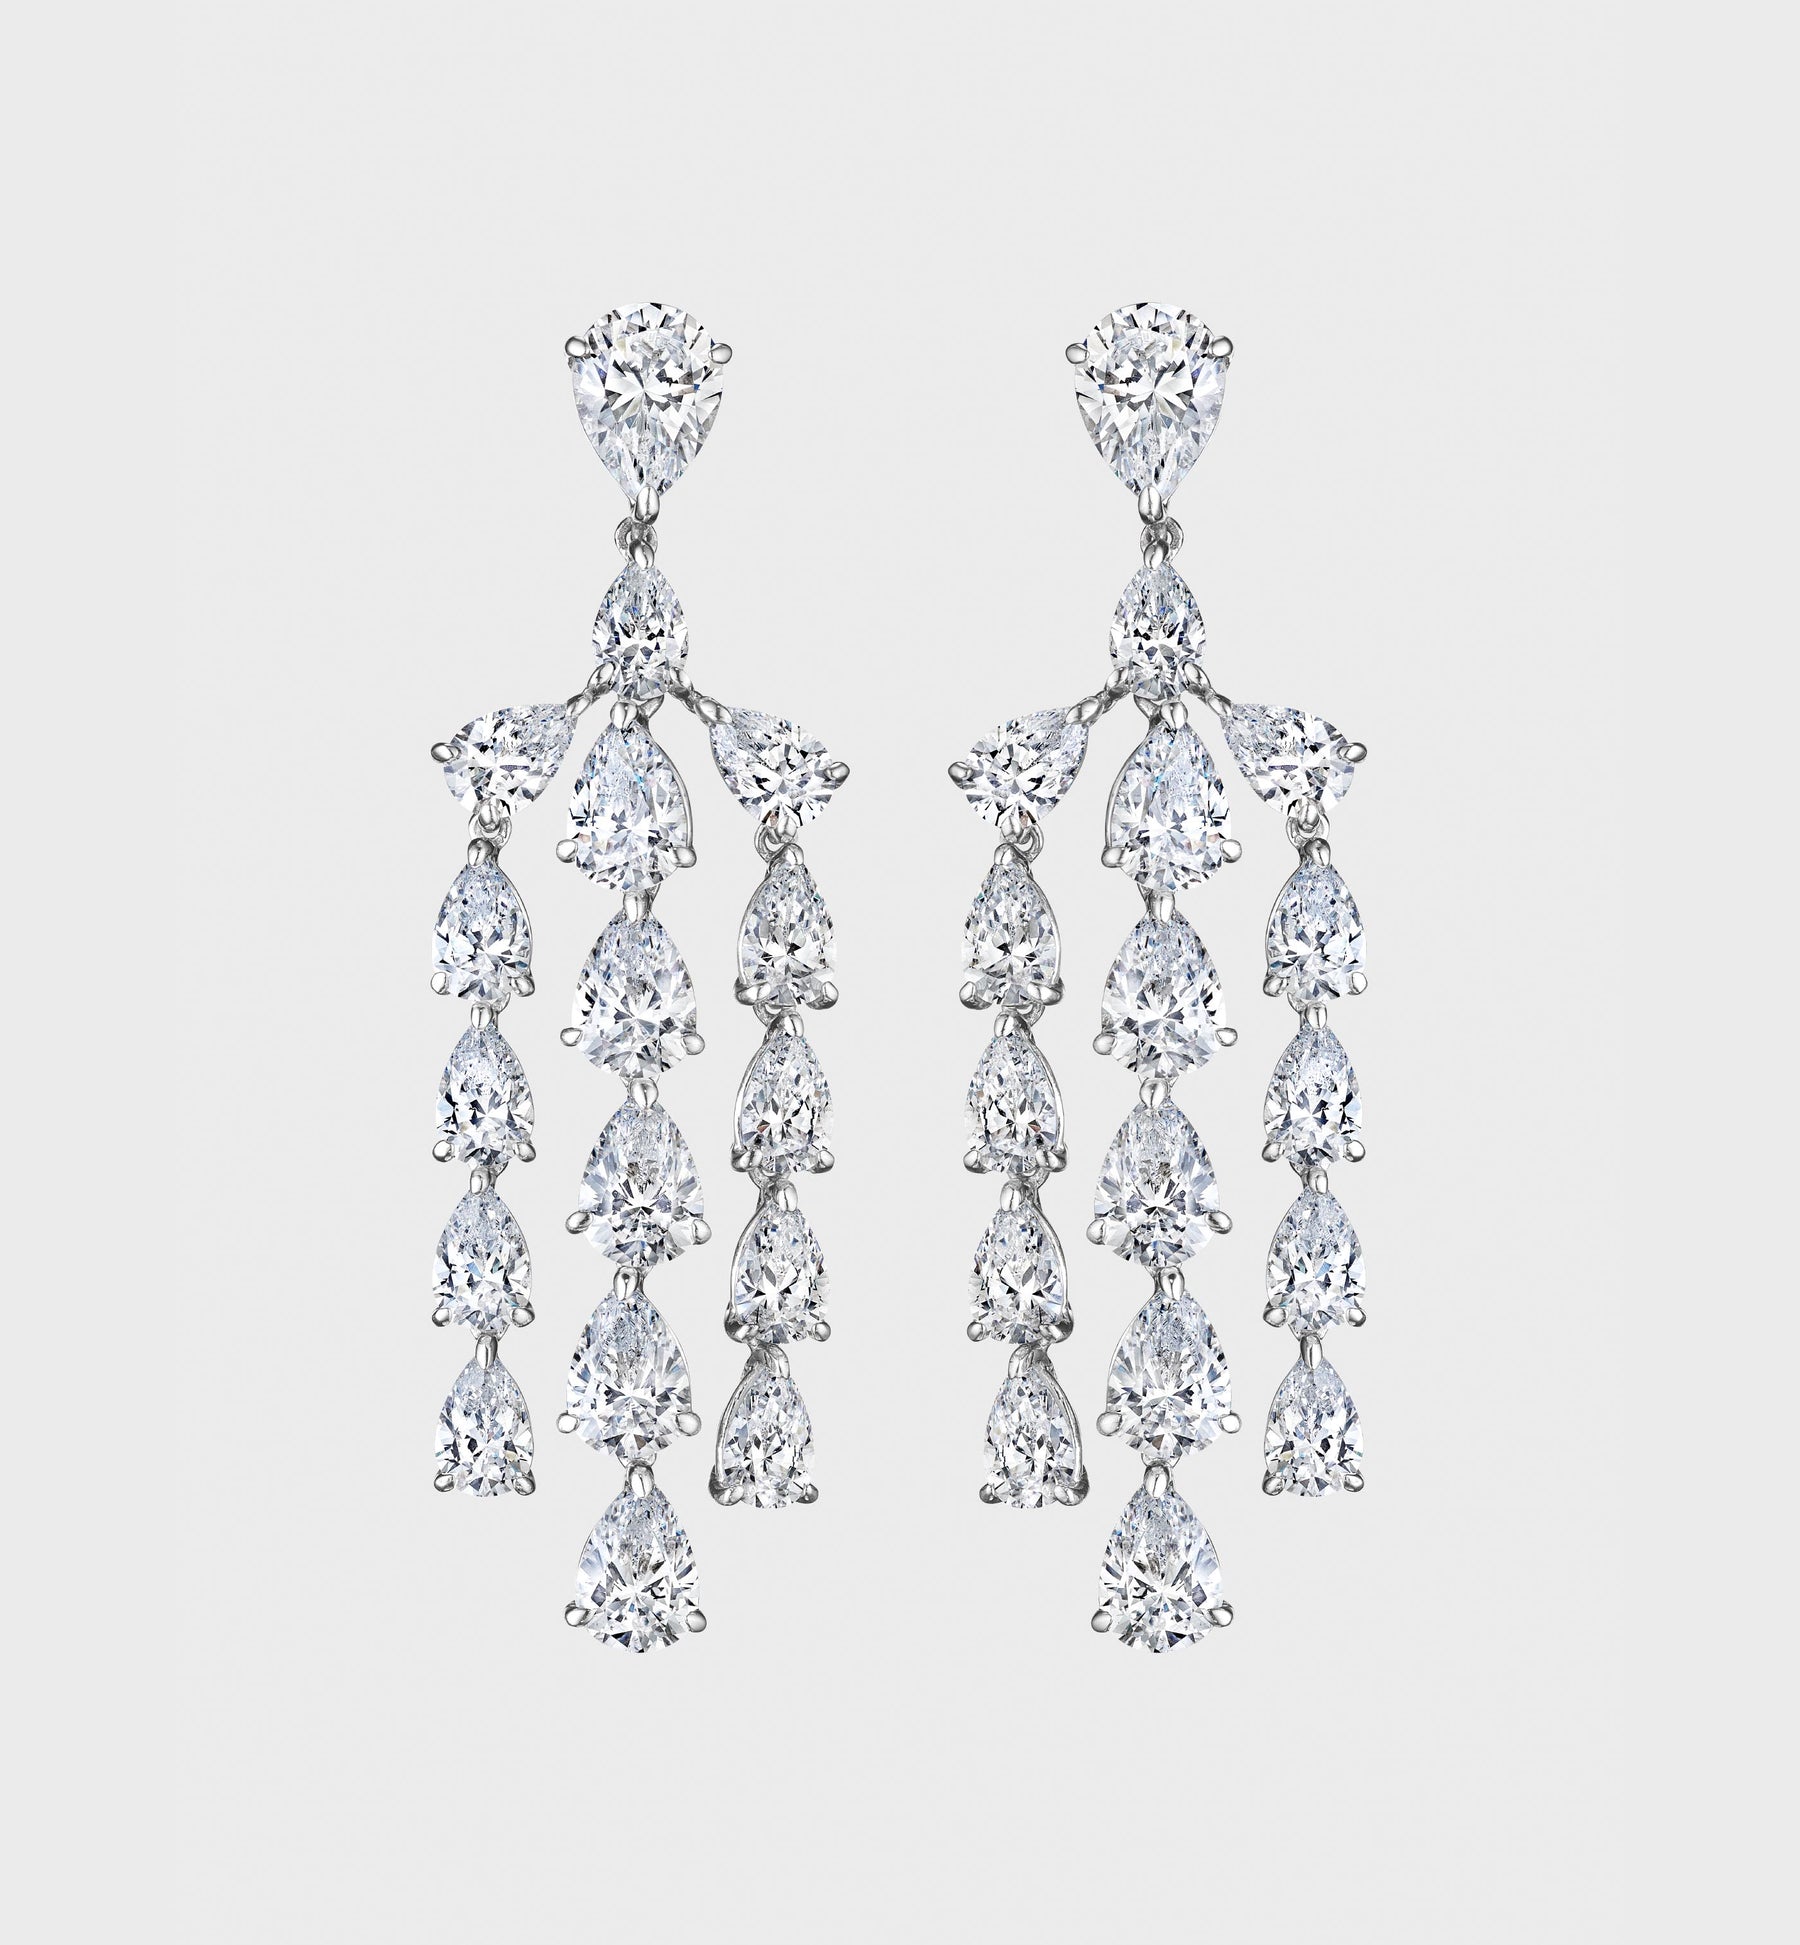 Diamond Chandelier Earrings With Hand Cut Marquis Stones